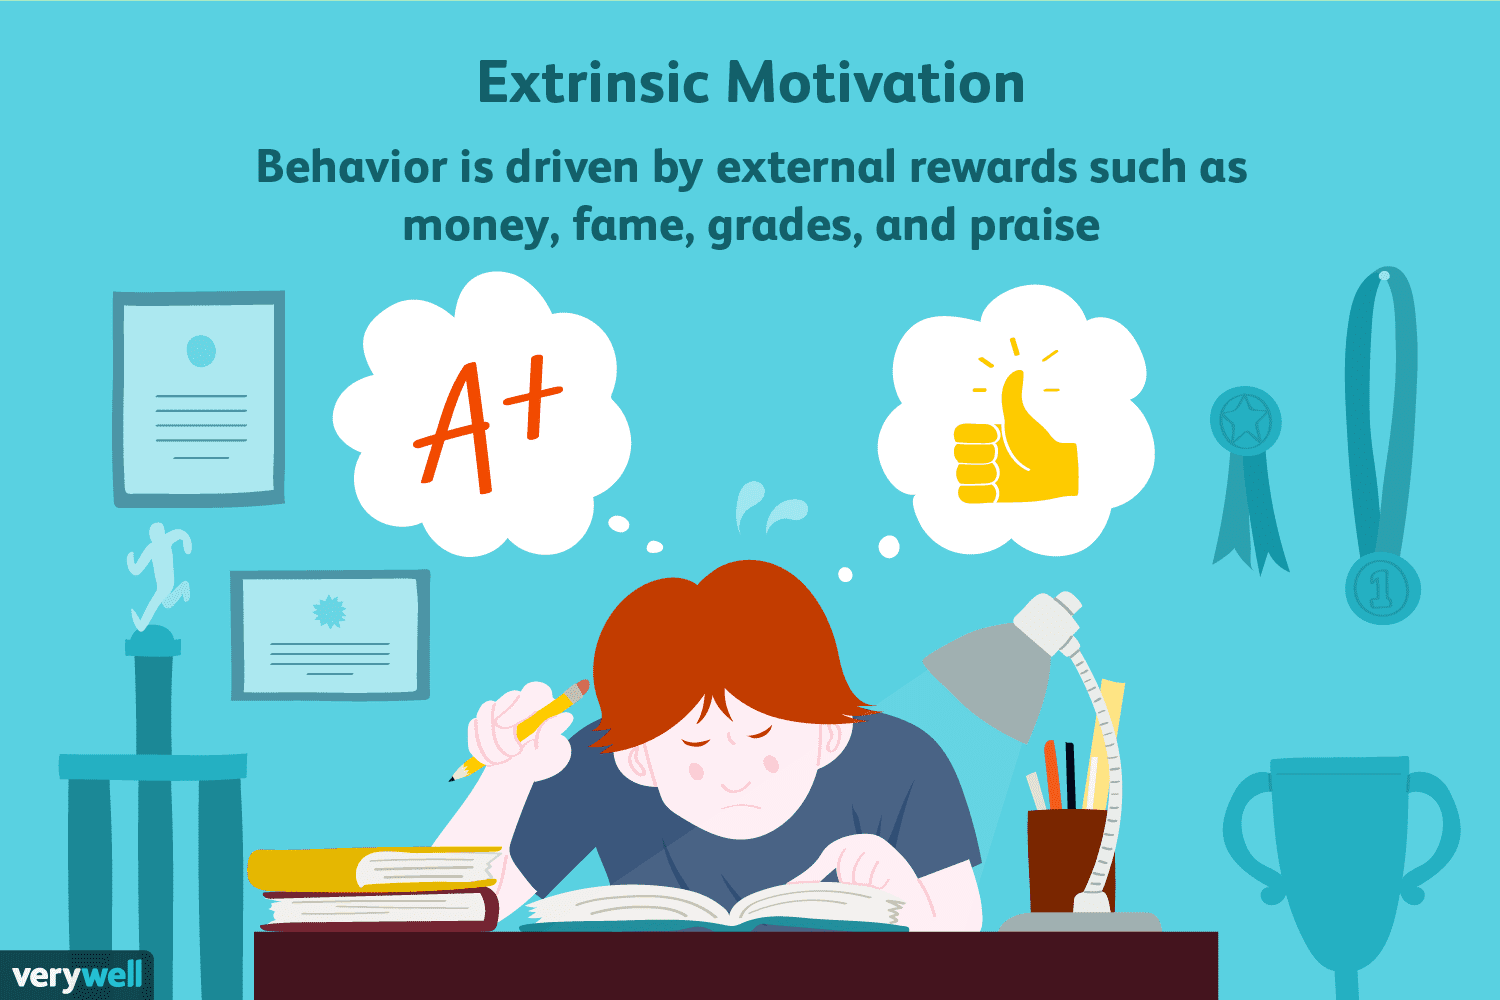 What Is Extrinsic Motivation and How Does It Work?